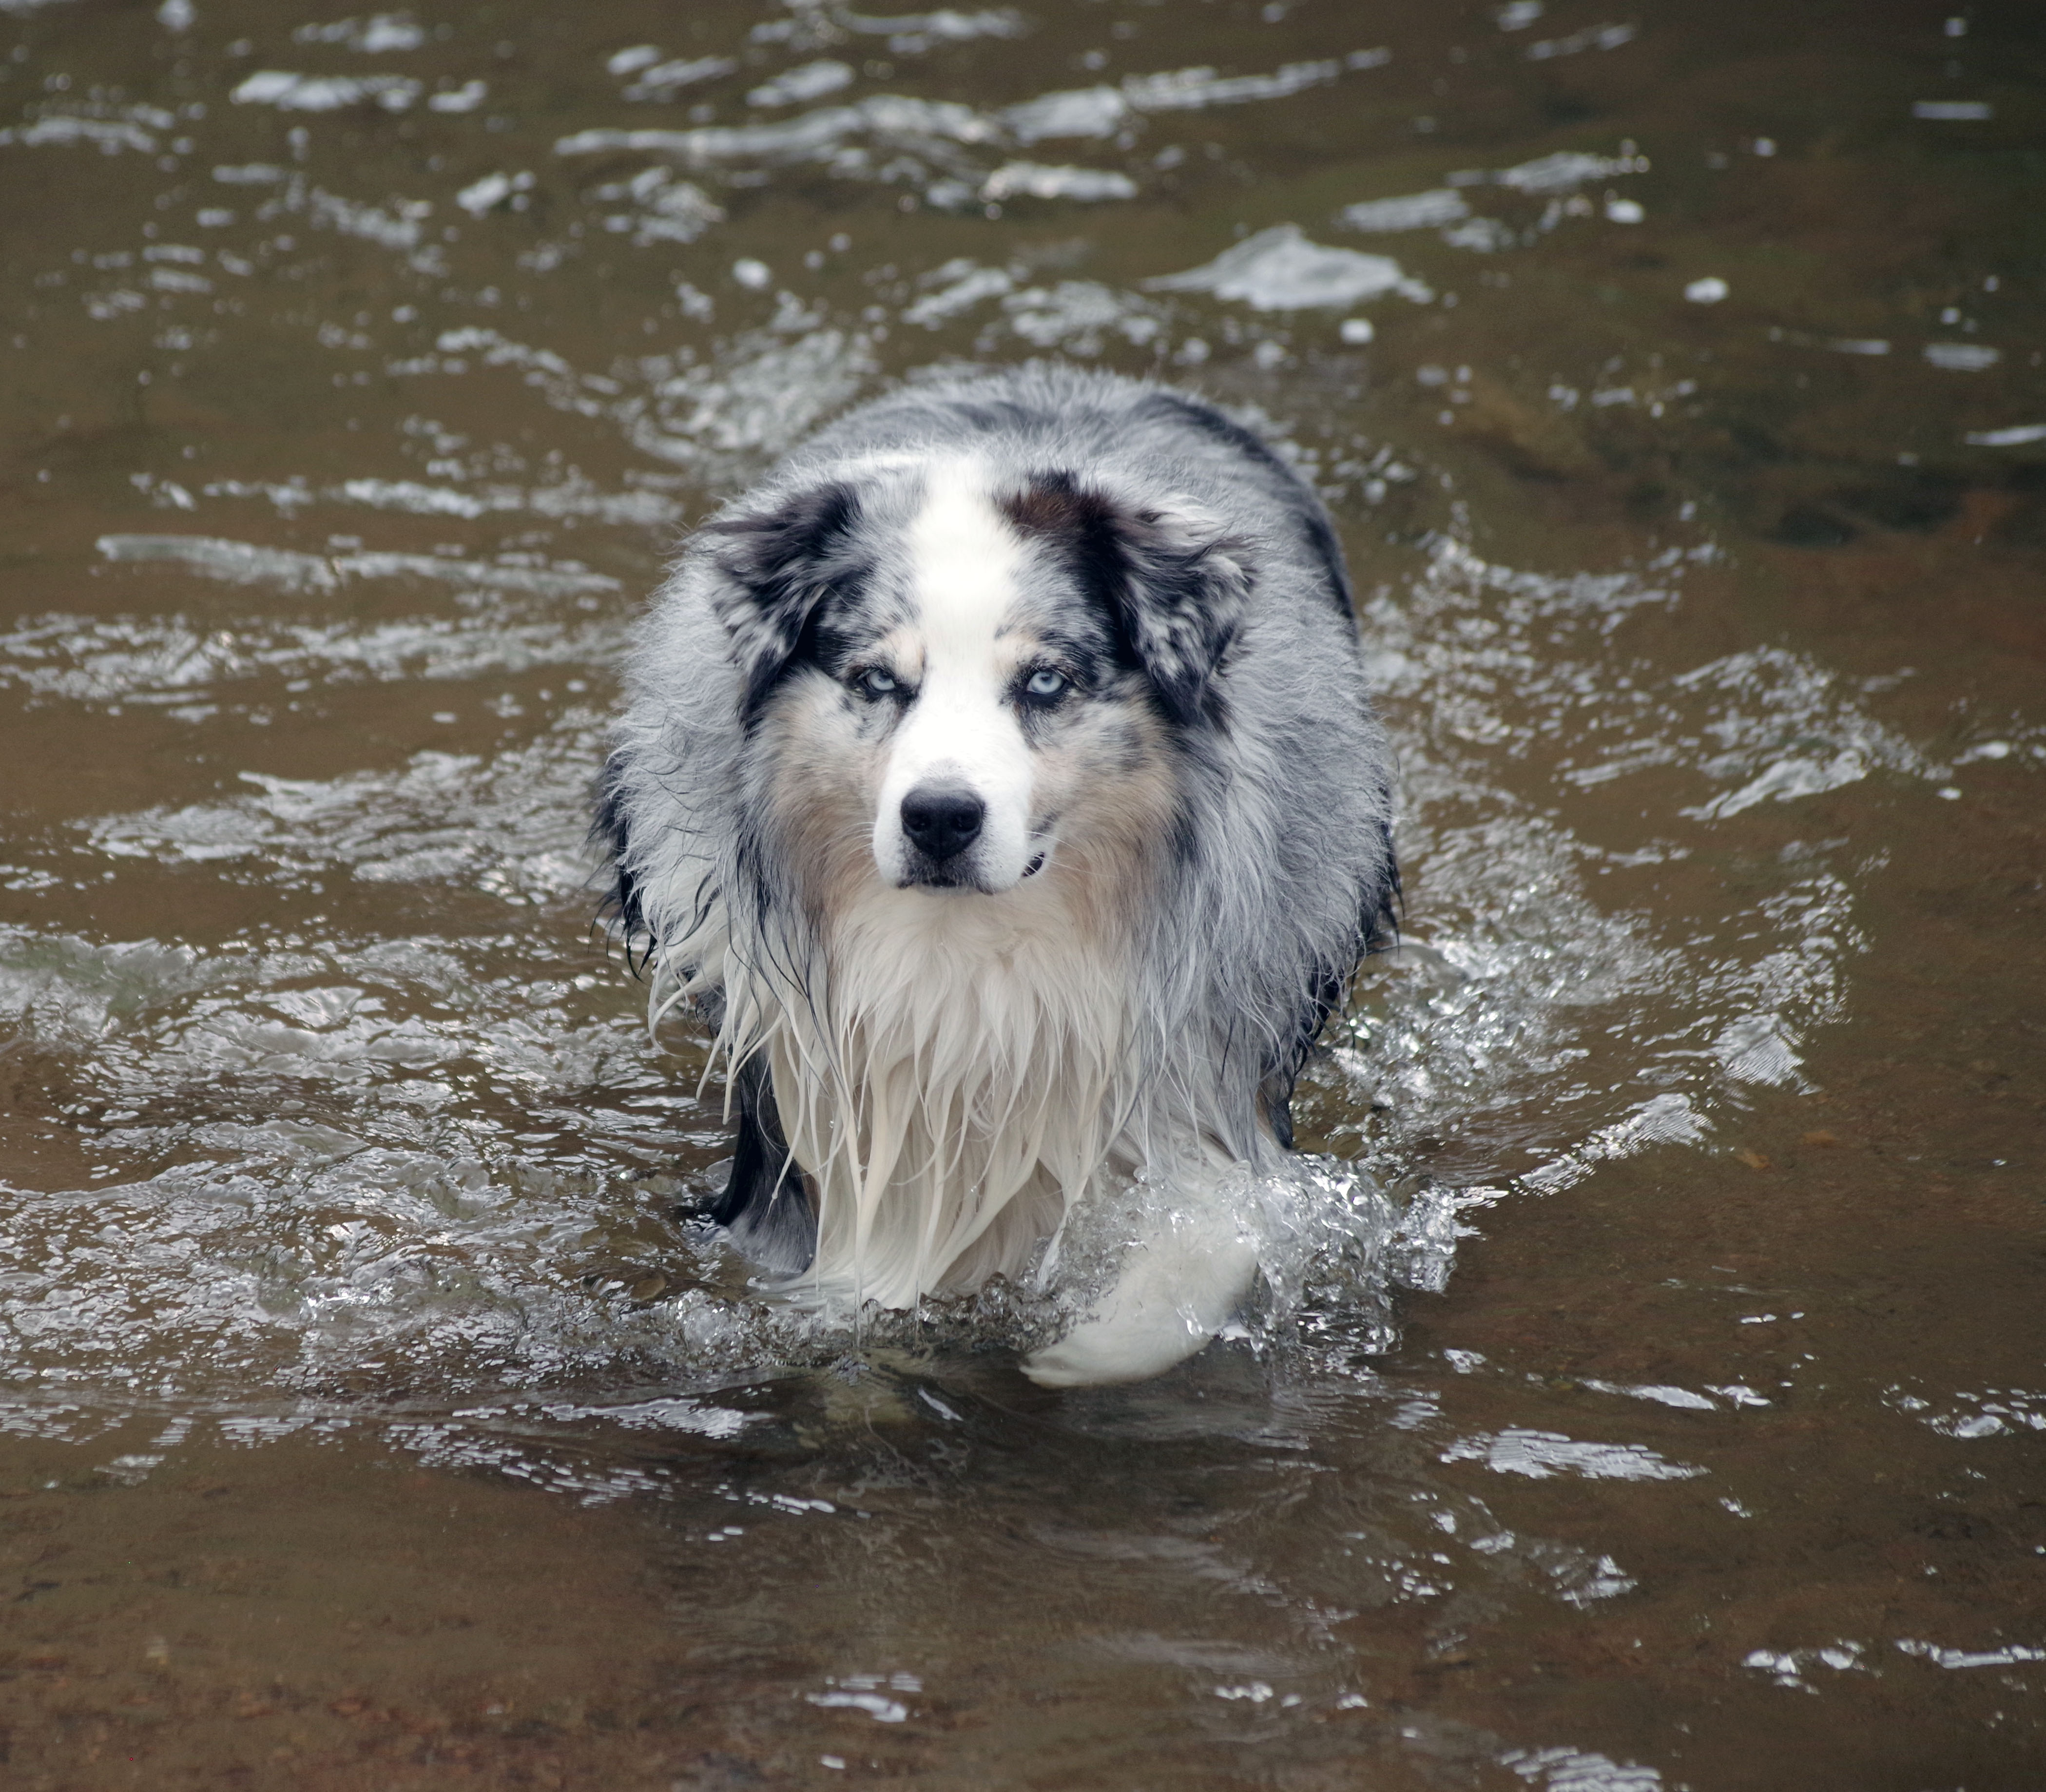 Niko the Big Dawg, loving the cool water of the South Platte River here in Colorado